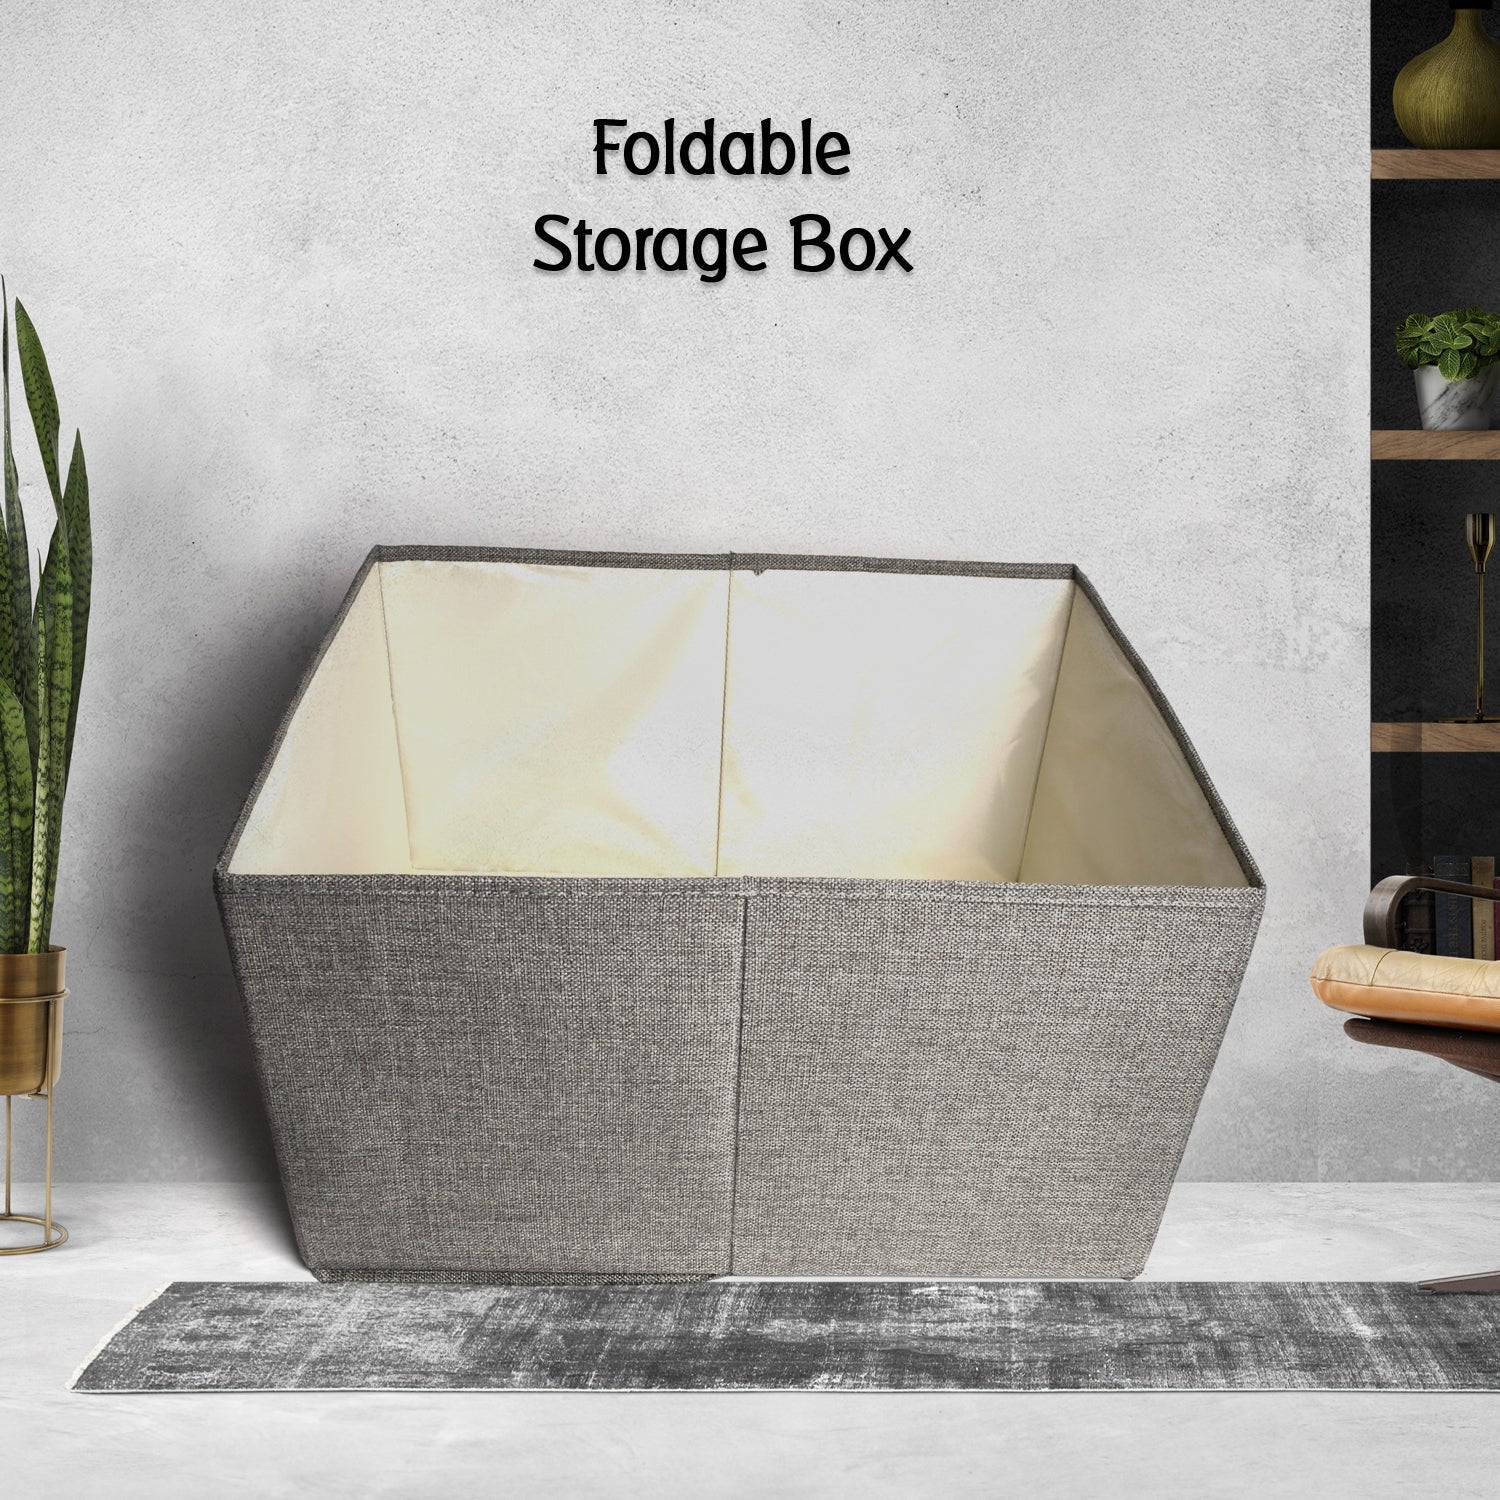 7398 Foldable Storage Bins Boxes Cubes Container Organizer Baskets Fabric Drawers Bedroom, Closet, Toys, Thick Cloth Shimmer DeoDap